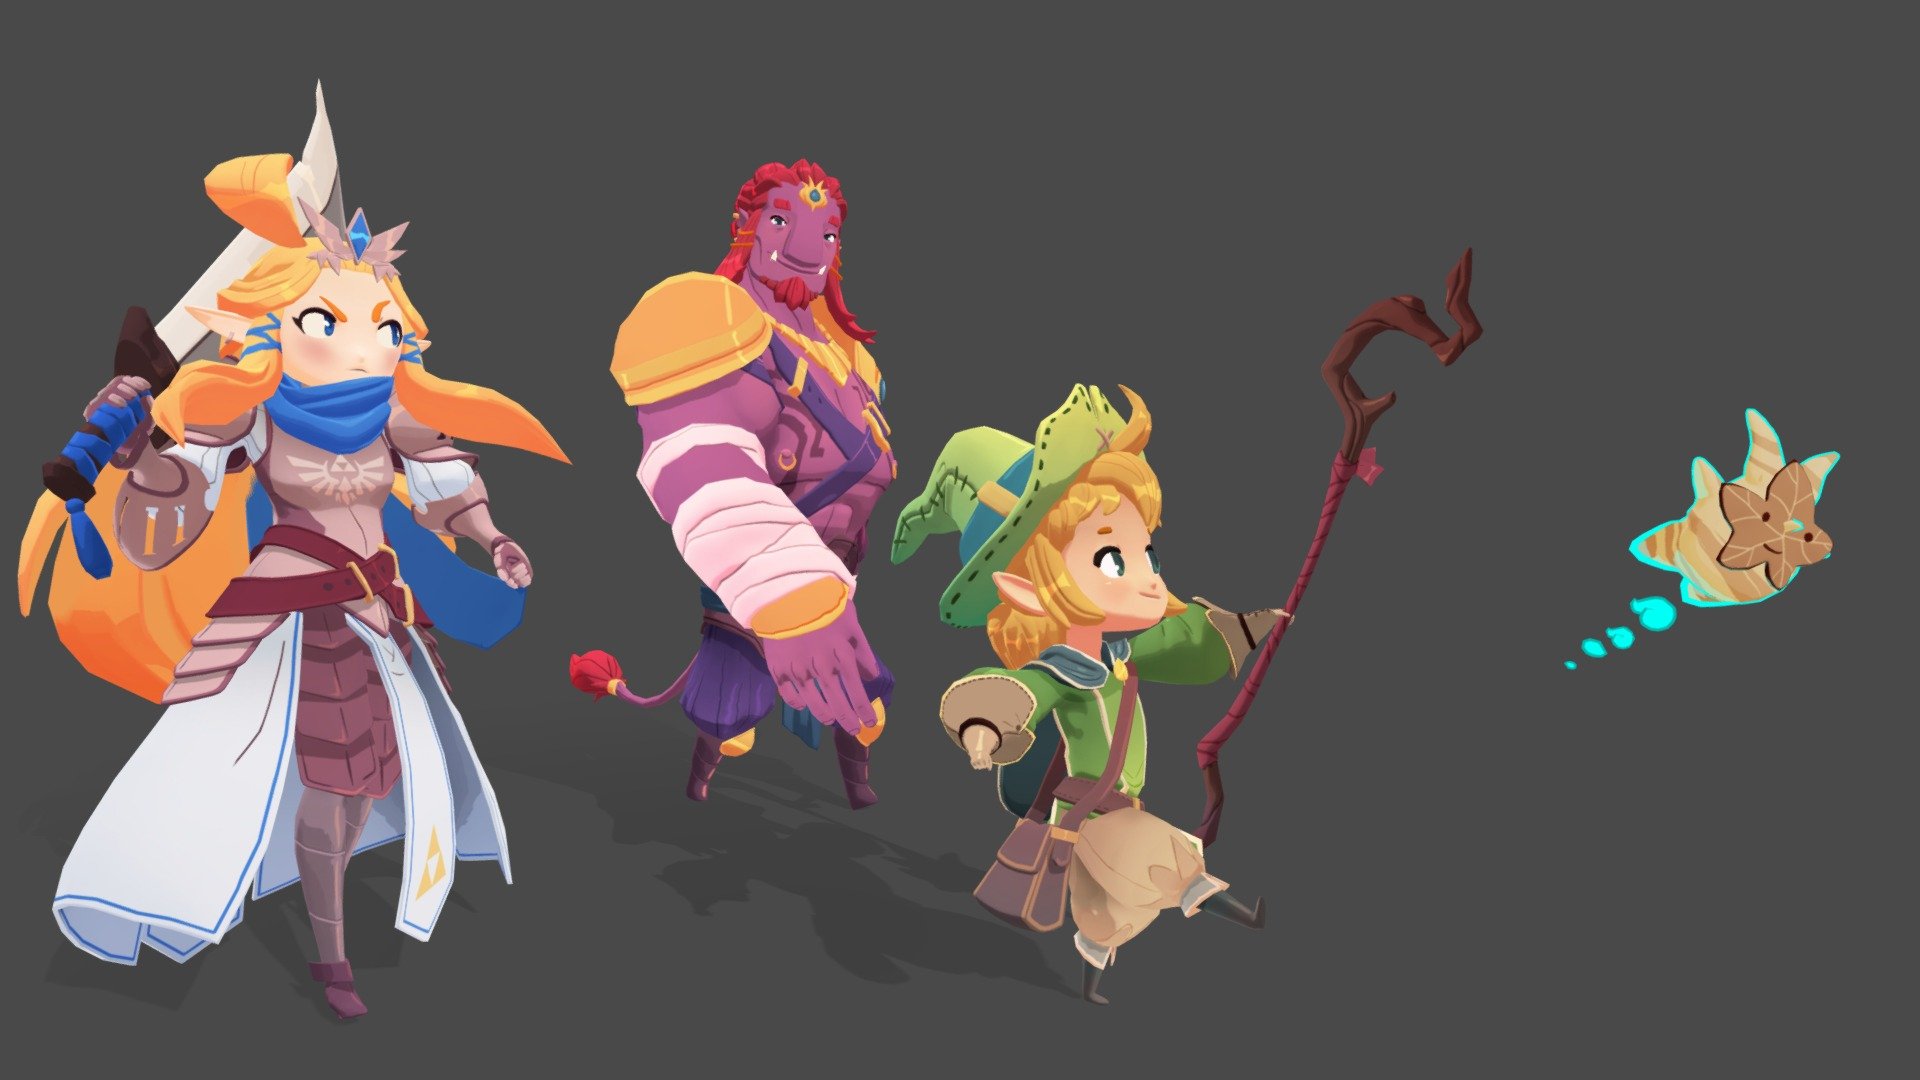 See the full breakdown here https://www.artstation.com/artwork/8bBLLR

3D fanart of the wonderful character re-designs of Zelda, Link, and Gannondorf by Toby Allen (see more of his work here)

In this re-imagining, the triforces are swapped so Zelda is Power, Gannondorf is Courage, and Link is Wisdom.  From the descriptions and comments surrounding the original designs, these three are not sword enemies but unlikely allies at least for some part of the story.

I sculpted, modeled, UV'd, textured, rigged, and animated these 3 over about 2 months of after-work free time 3d model